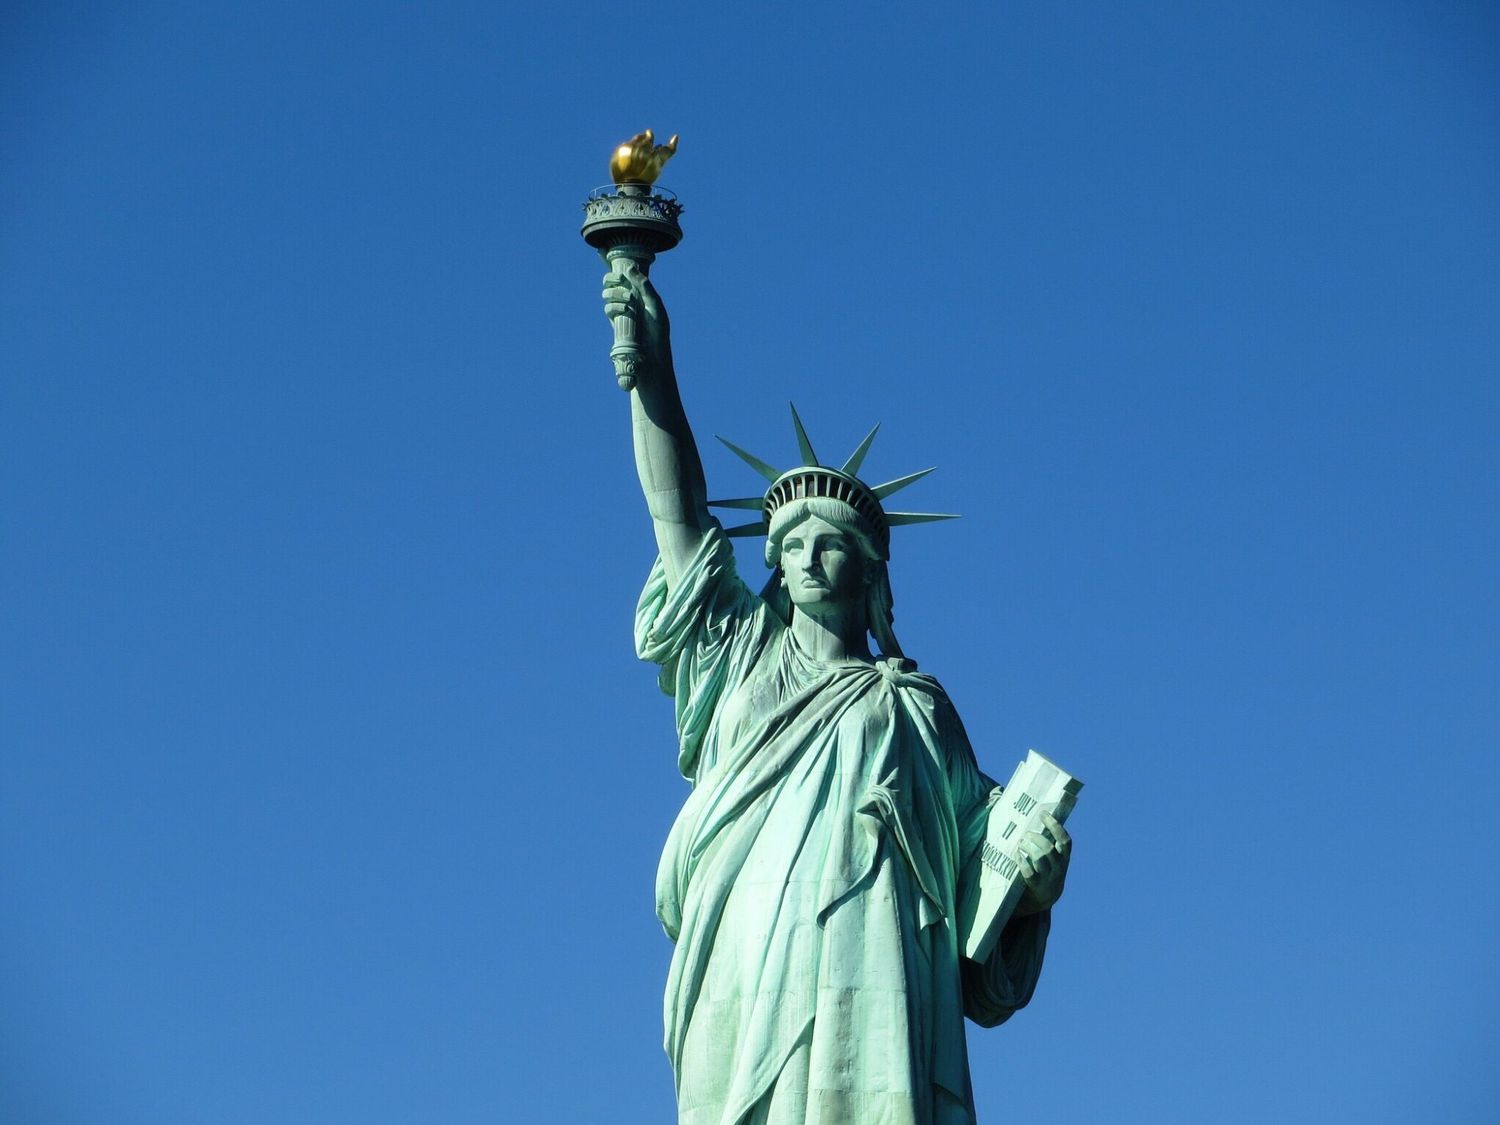 Quotes about the American flag and Statue of Liberty